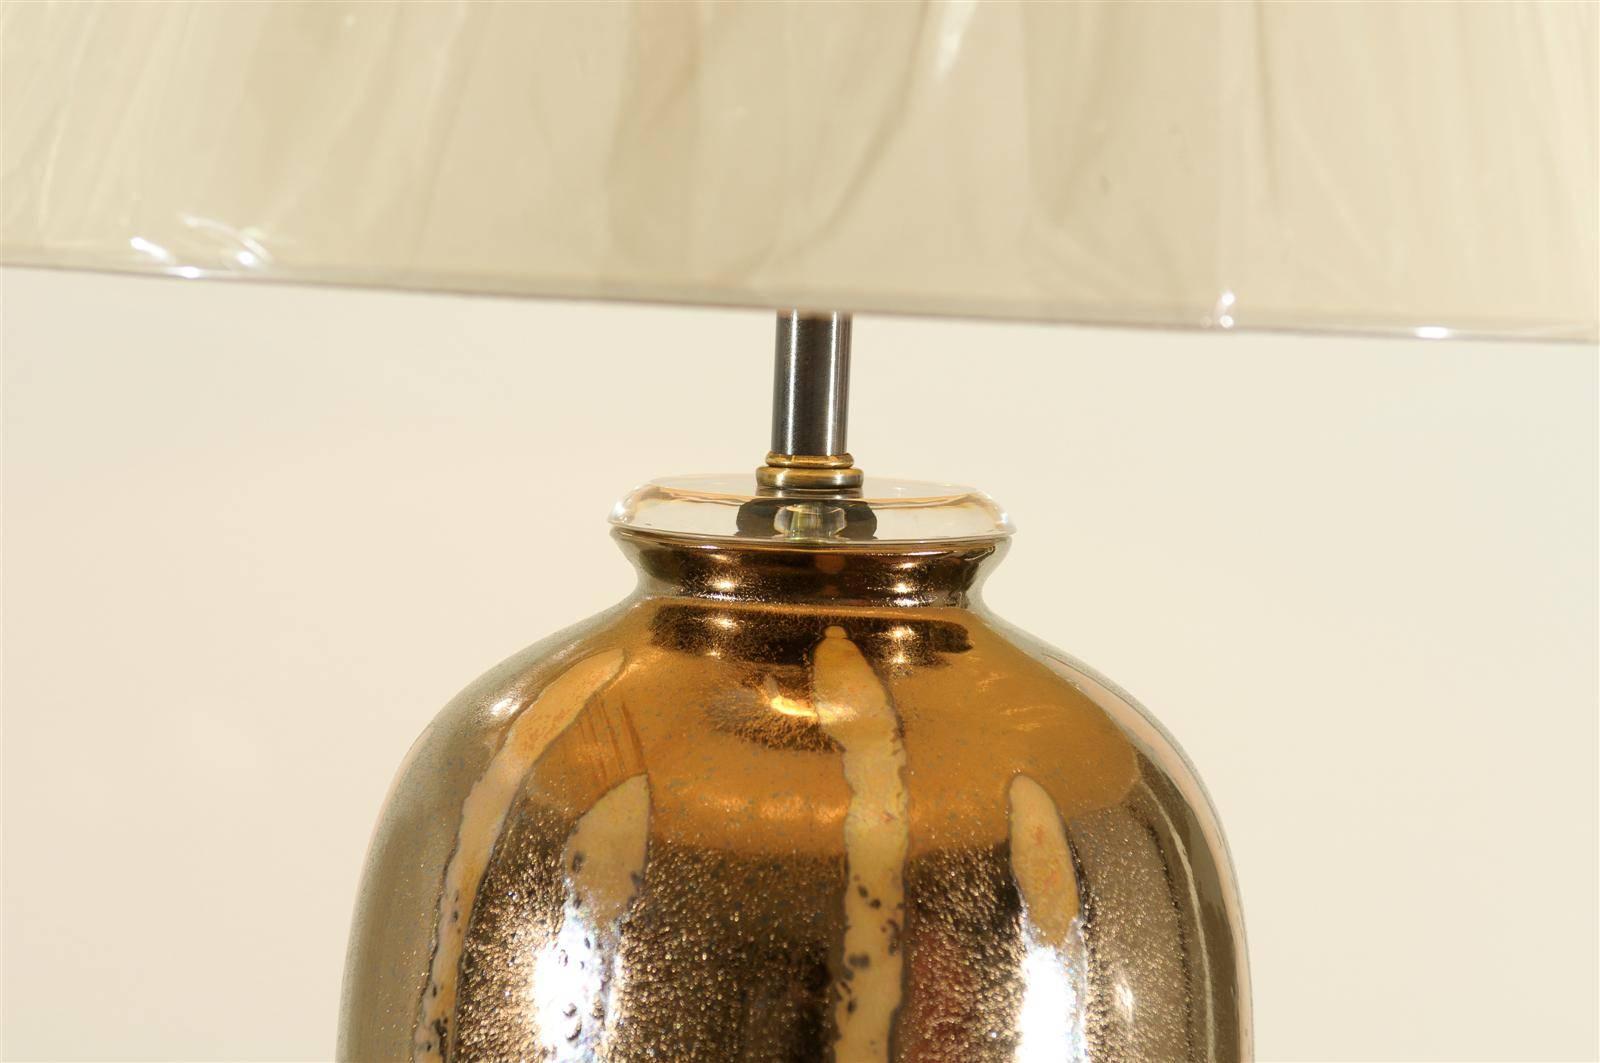 Late 20th Century Pair of Large-Scale Modern Ceramic Lamps with Lucite Accents